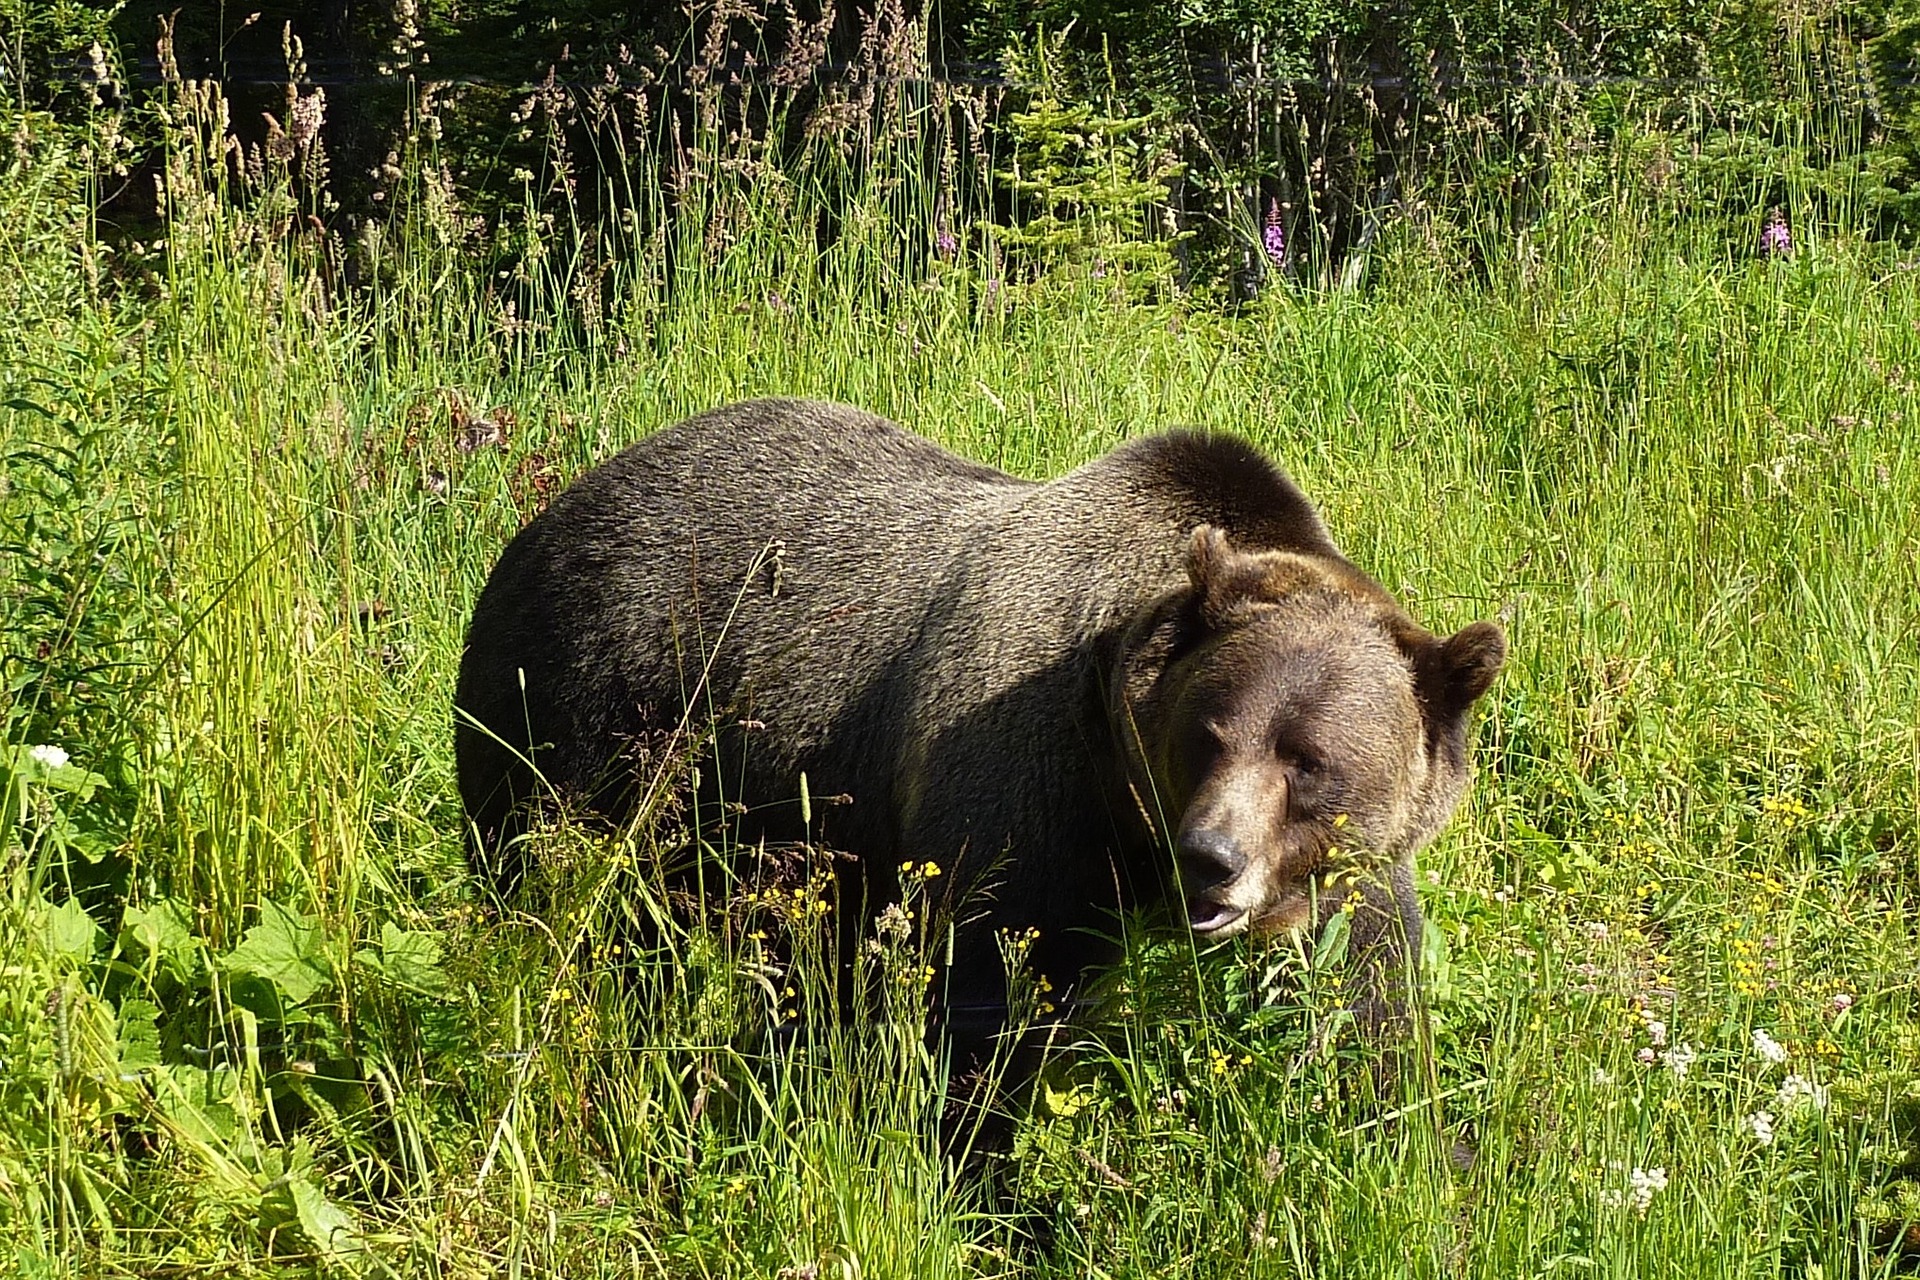 The griz thought to have mauled and killed a camper in Montana was likely more than 400 pounds